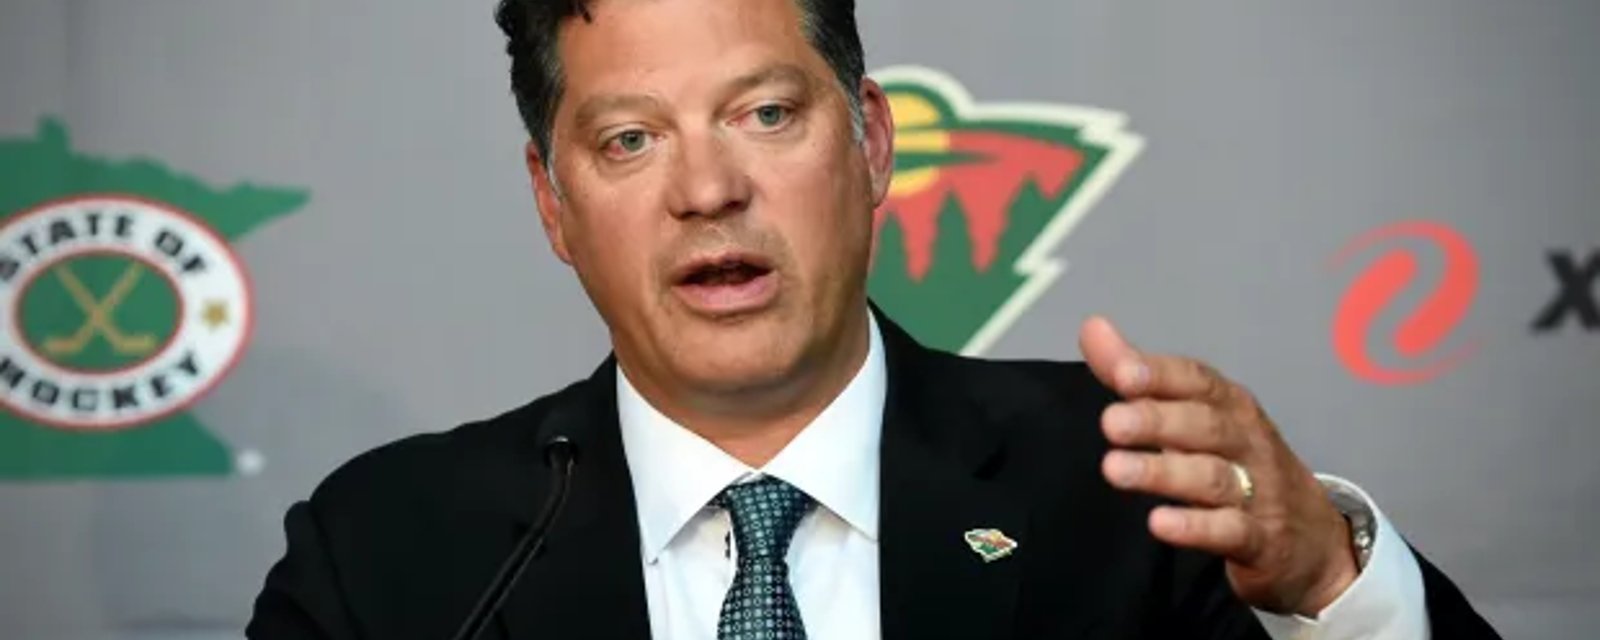 Employee who accused Bill Guerin of abuse leaves the Wild 